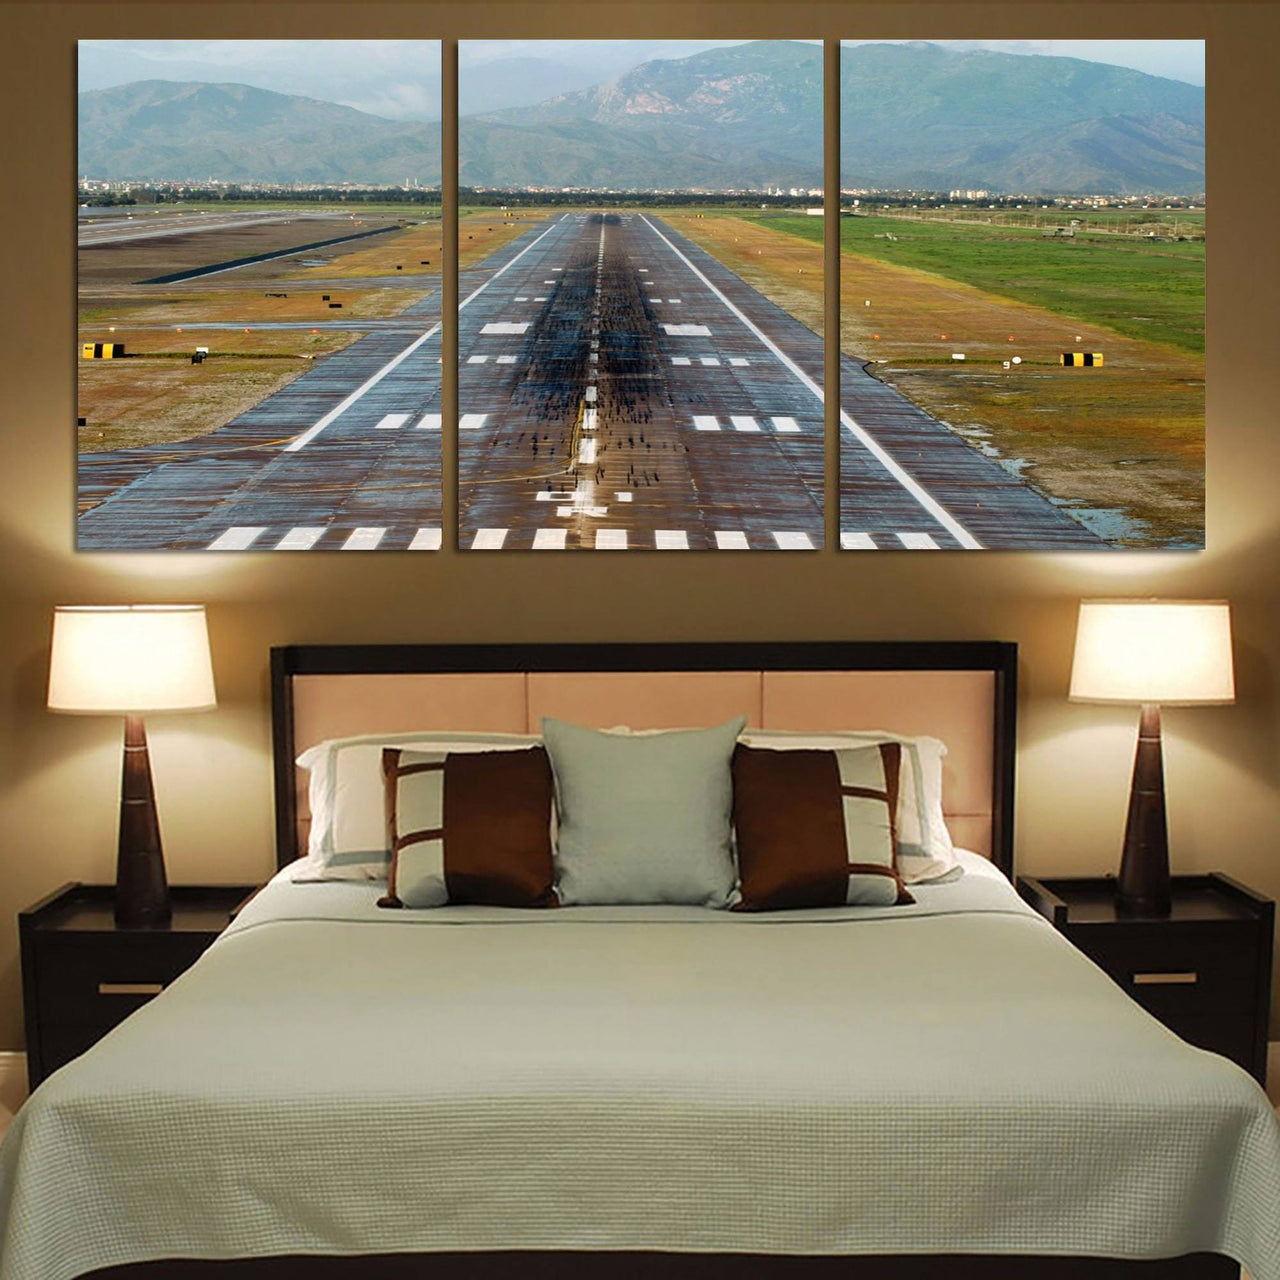 Amazing Mountain View & Runway Canvas Posters (3 Pieces) Aviation Shop 